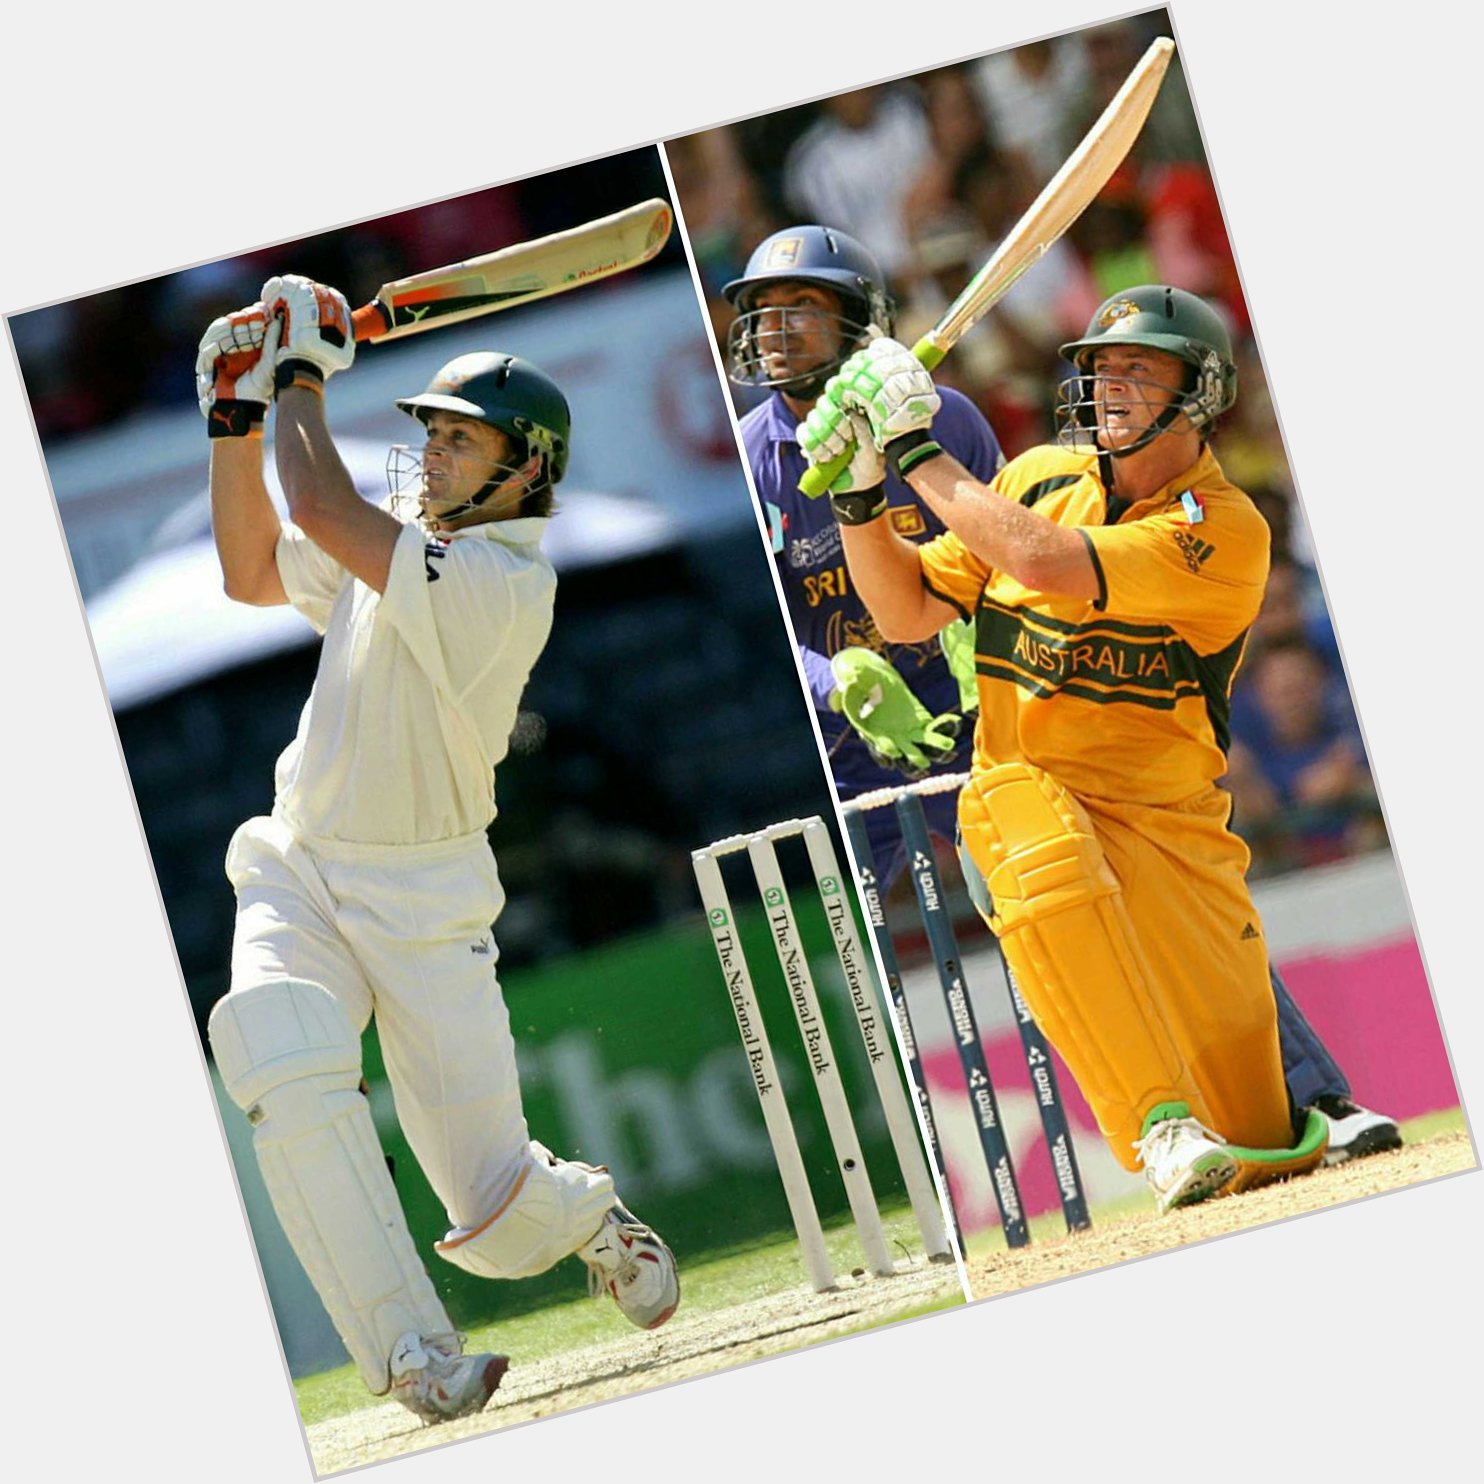 A Happy 48th birthday to Adam Gilchrist, one of the greatest wicket keeper-batsmen of all time   